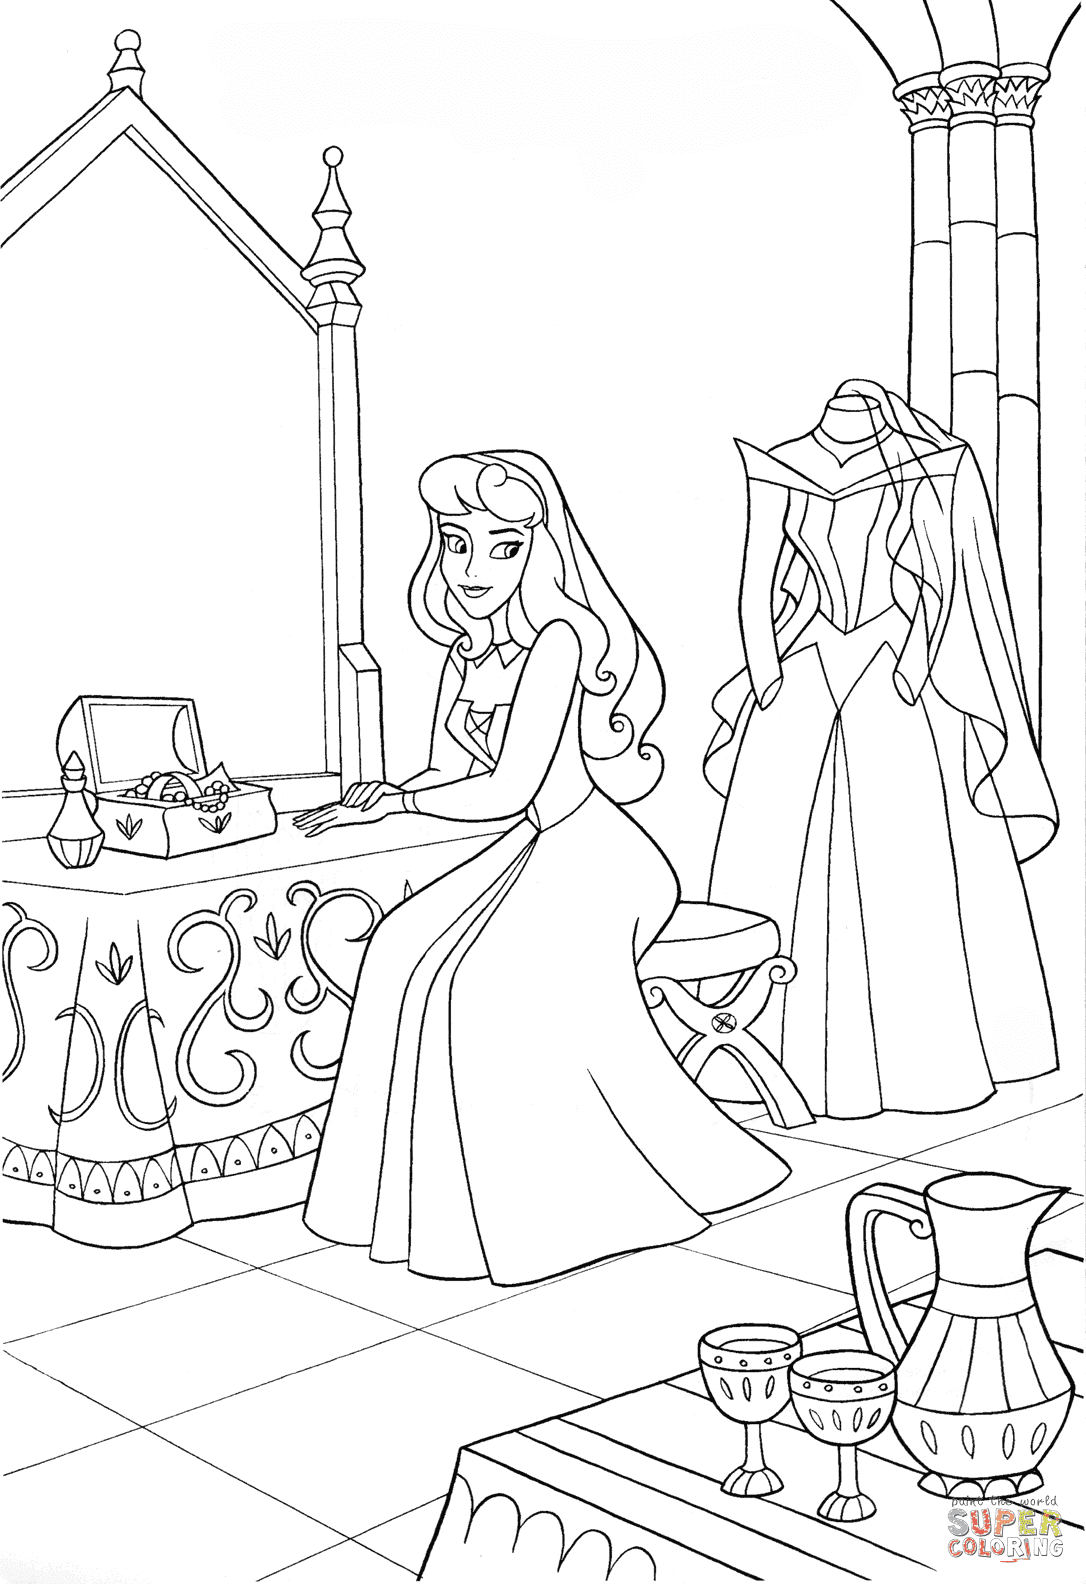 Aurora’s Wedding Day Coloring Page